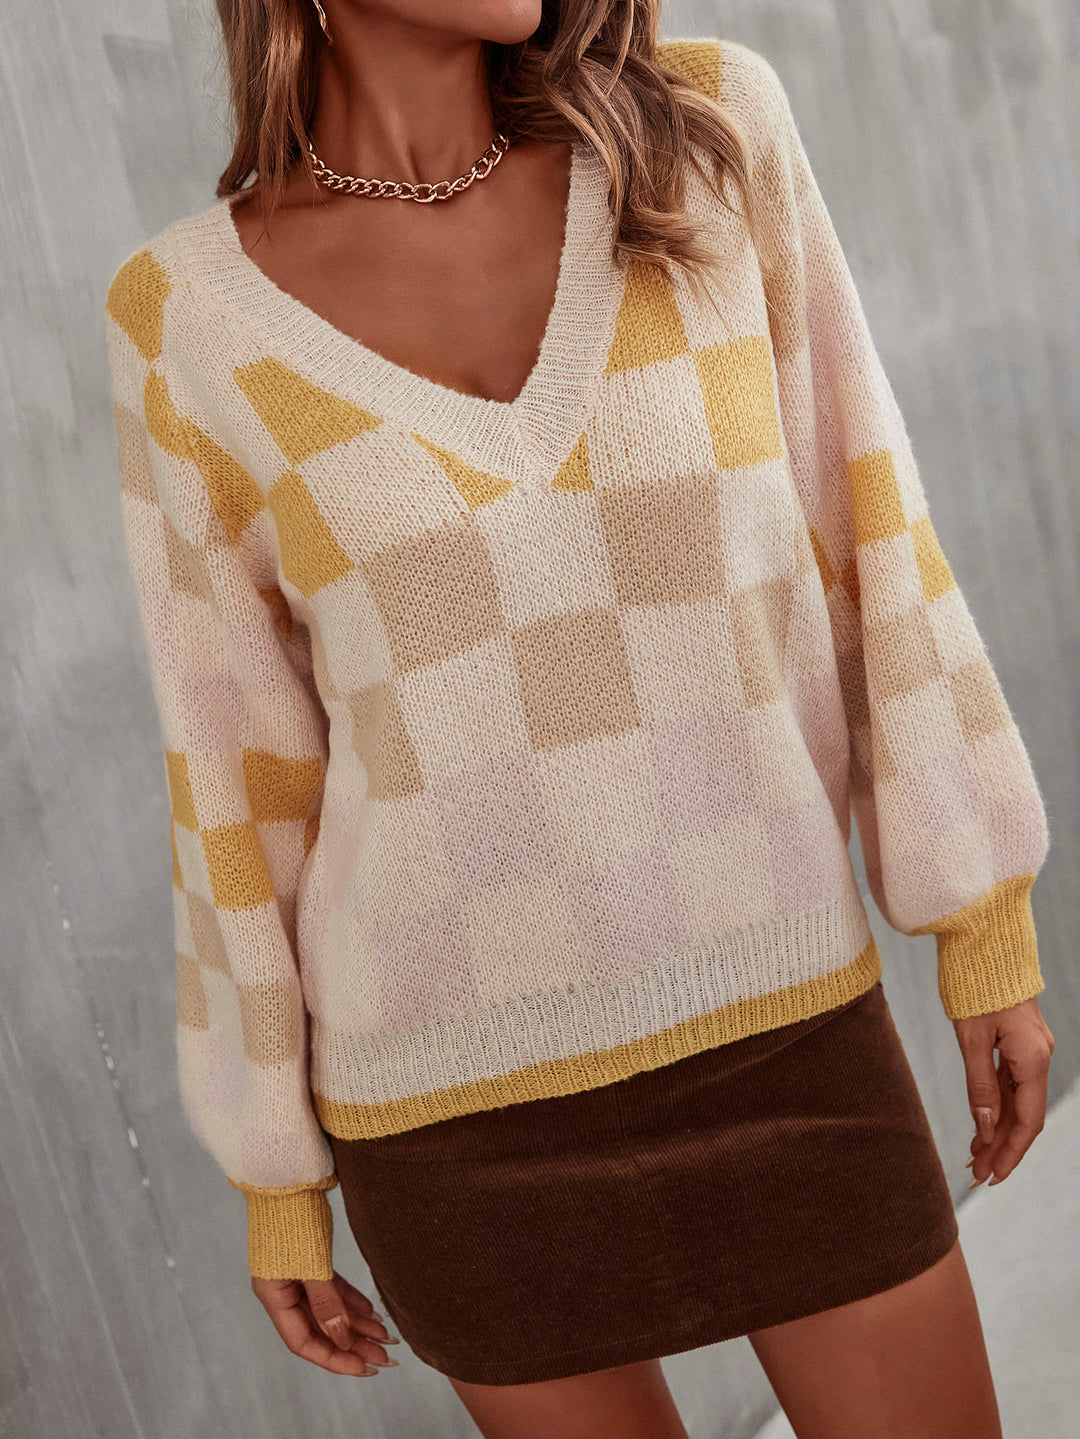 Early Autumn Women V neck Plaid Contrast Color Knitwear Pullover Sweater